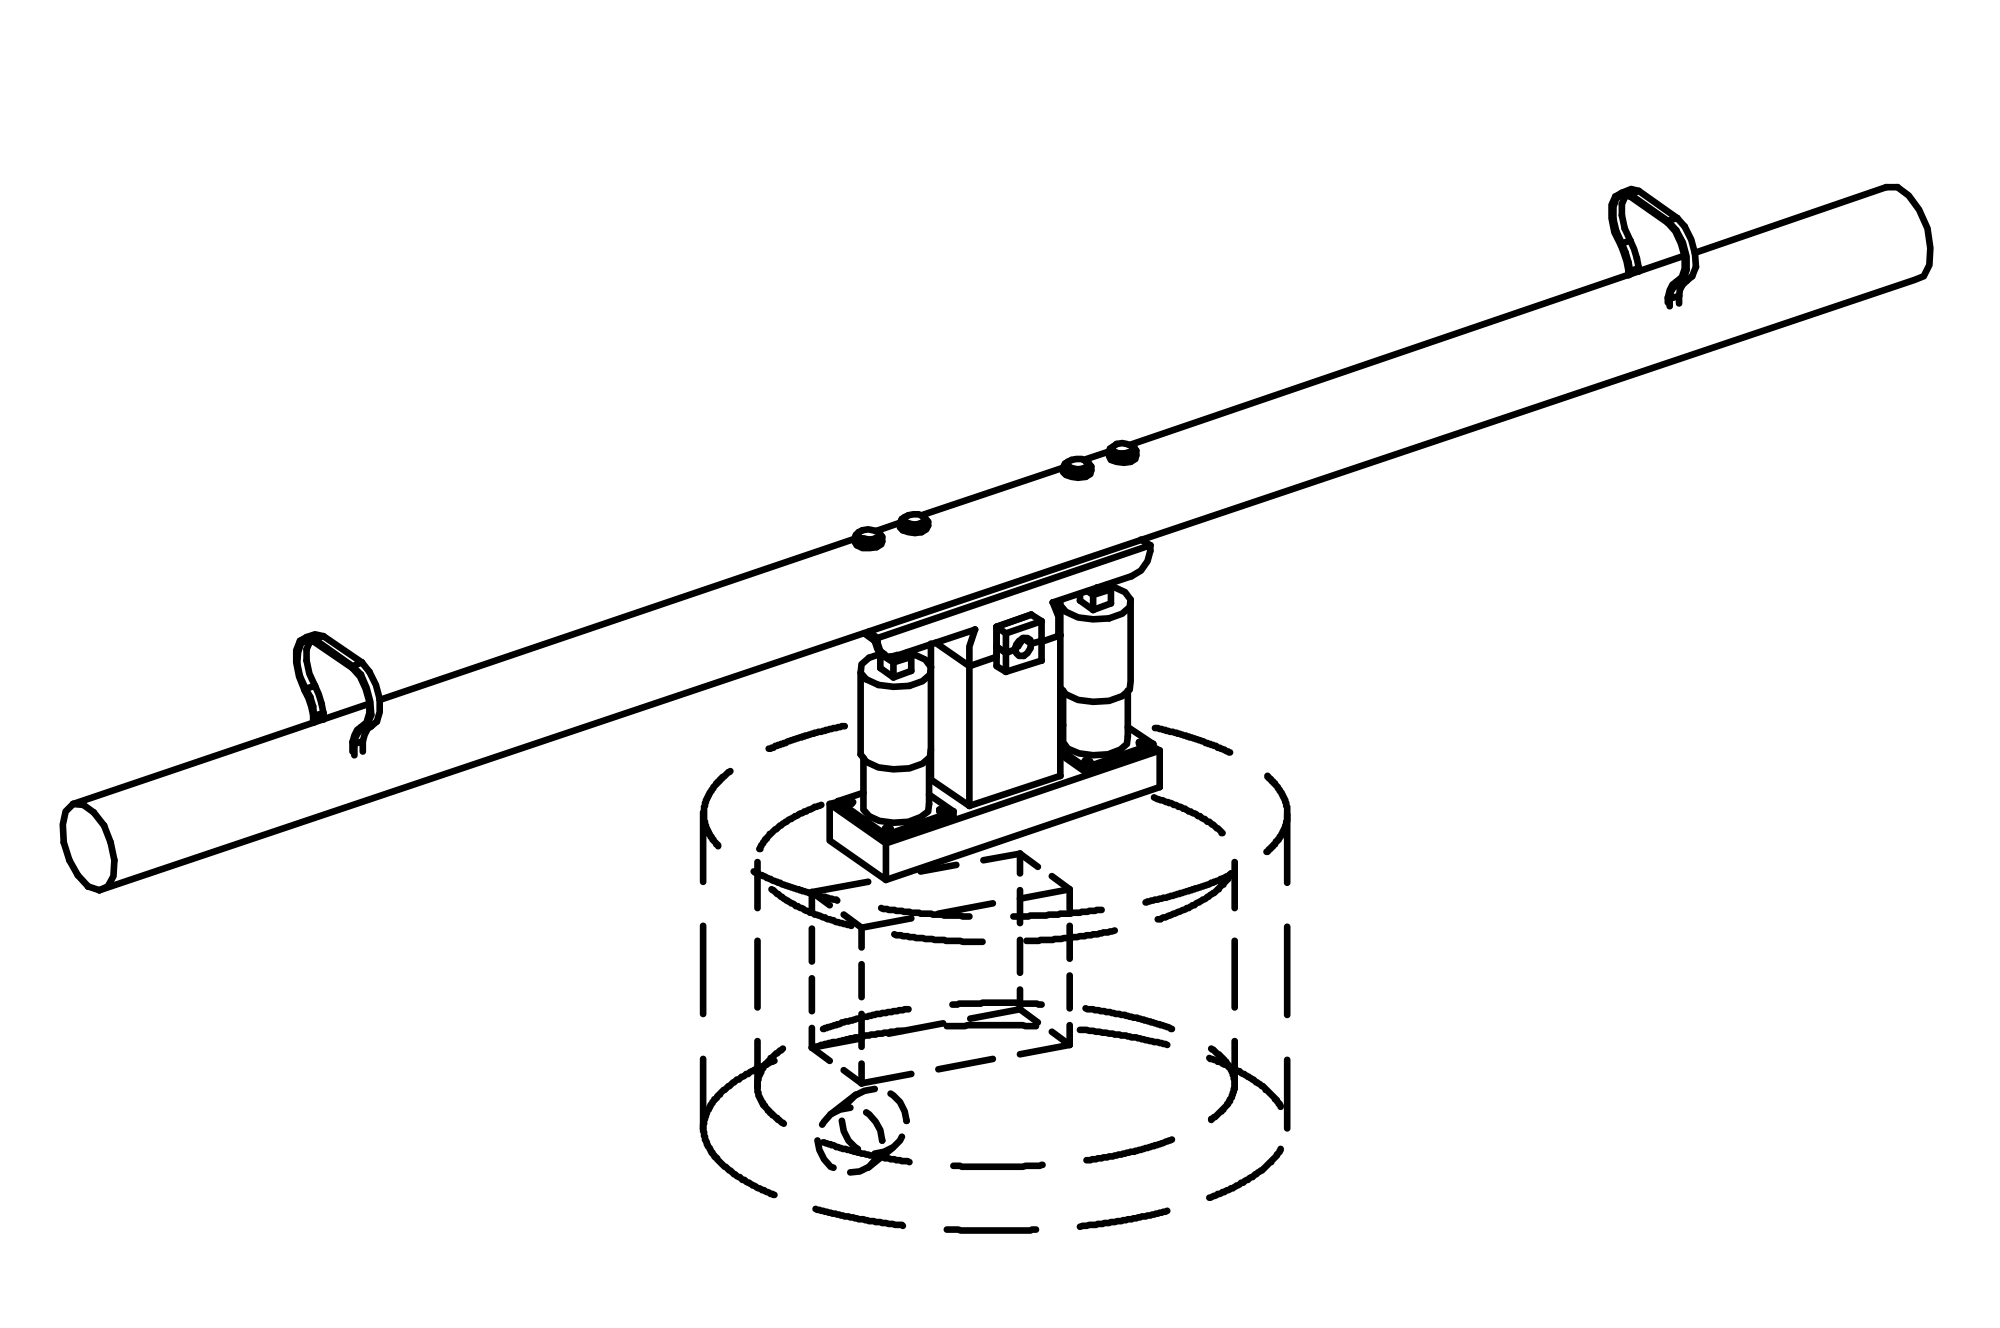 Pump See-saw with valve assembly and one way distribution